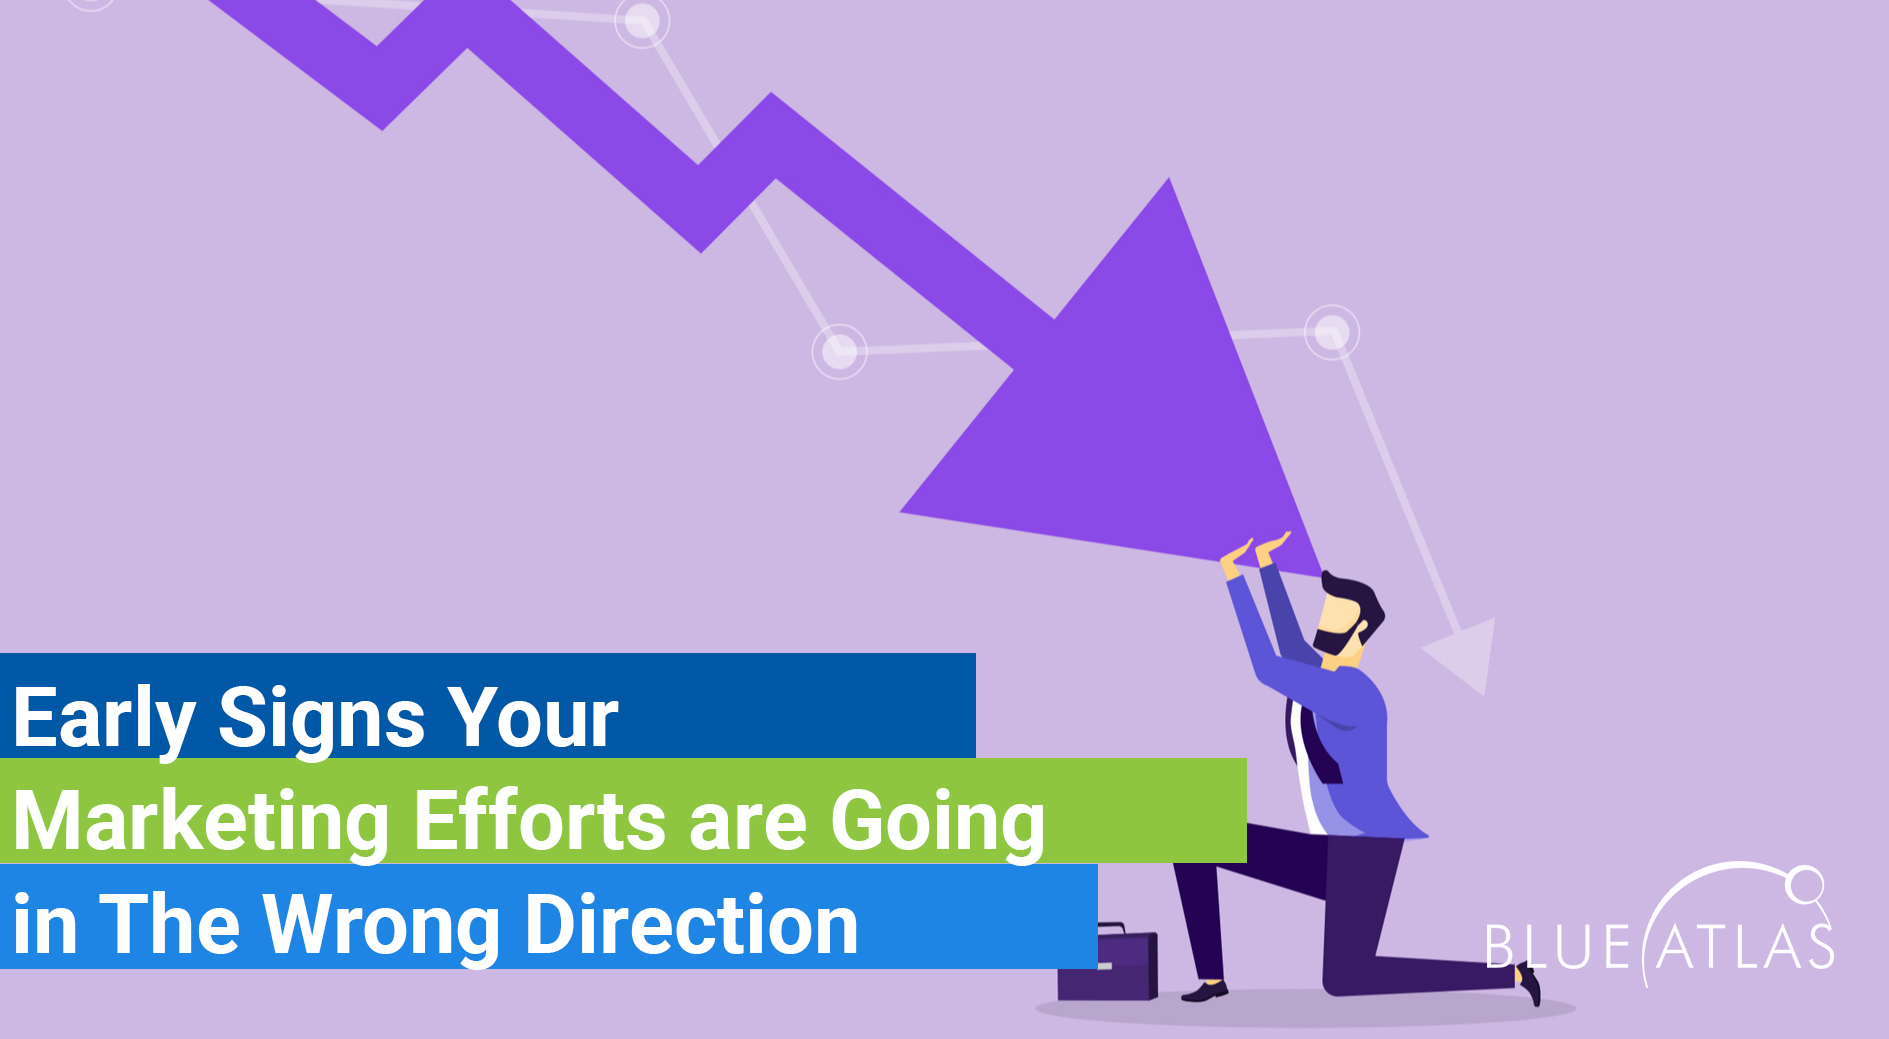 Early Signs Your Marketing Efforts are Going in The Wrong Direction